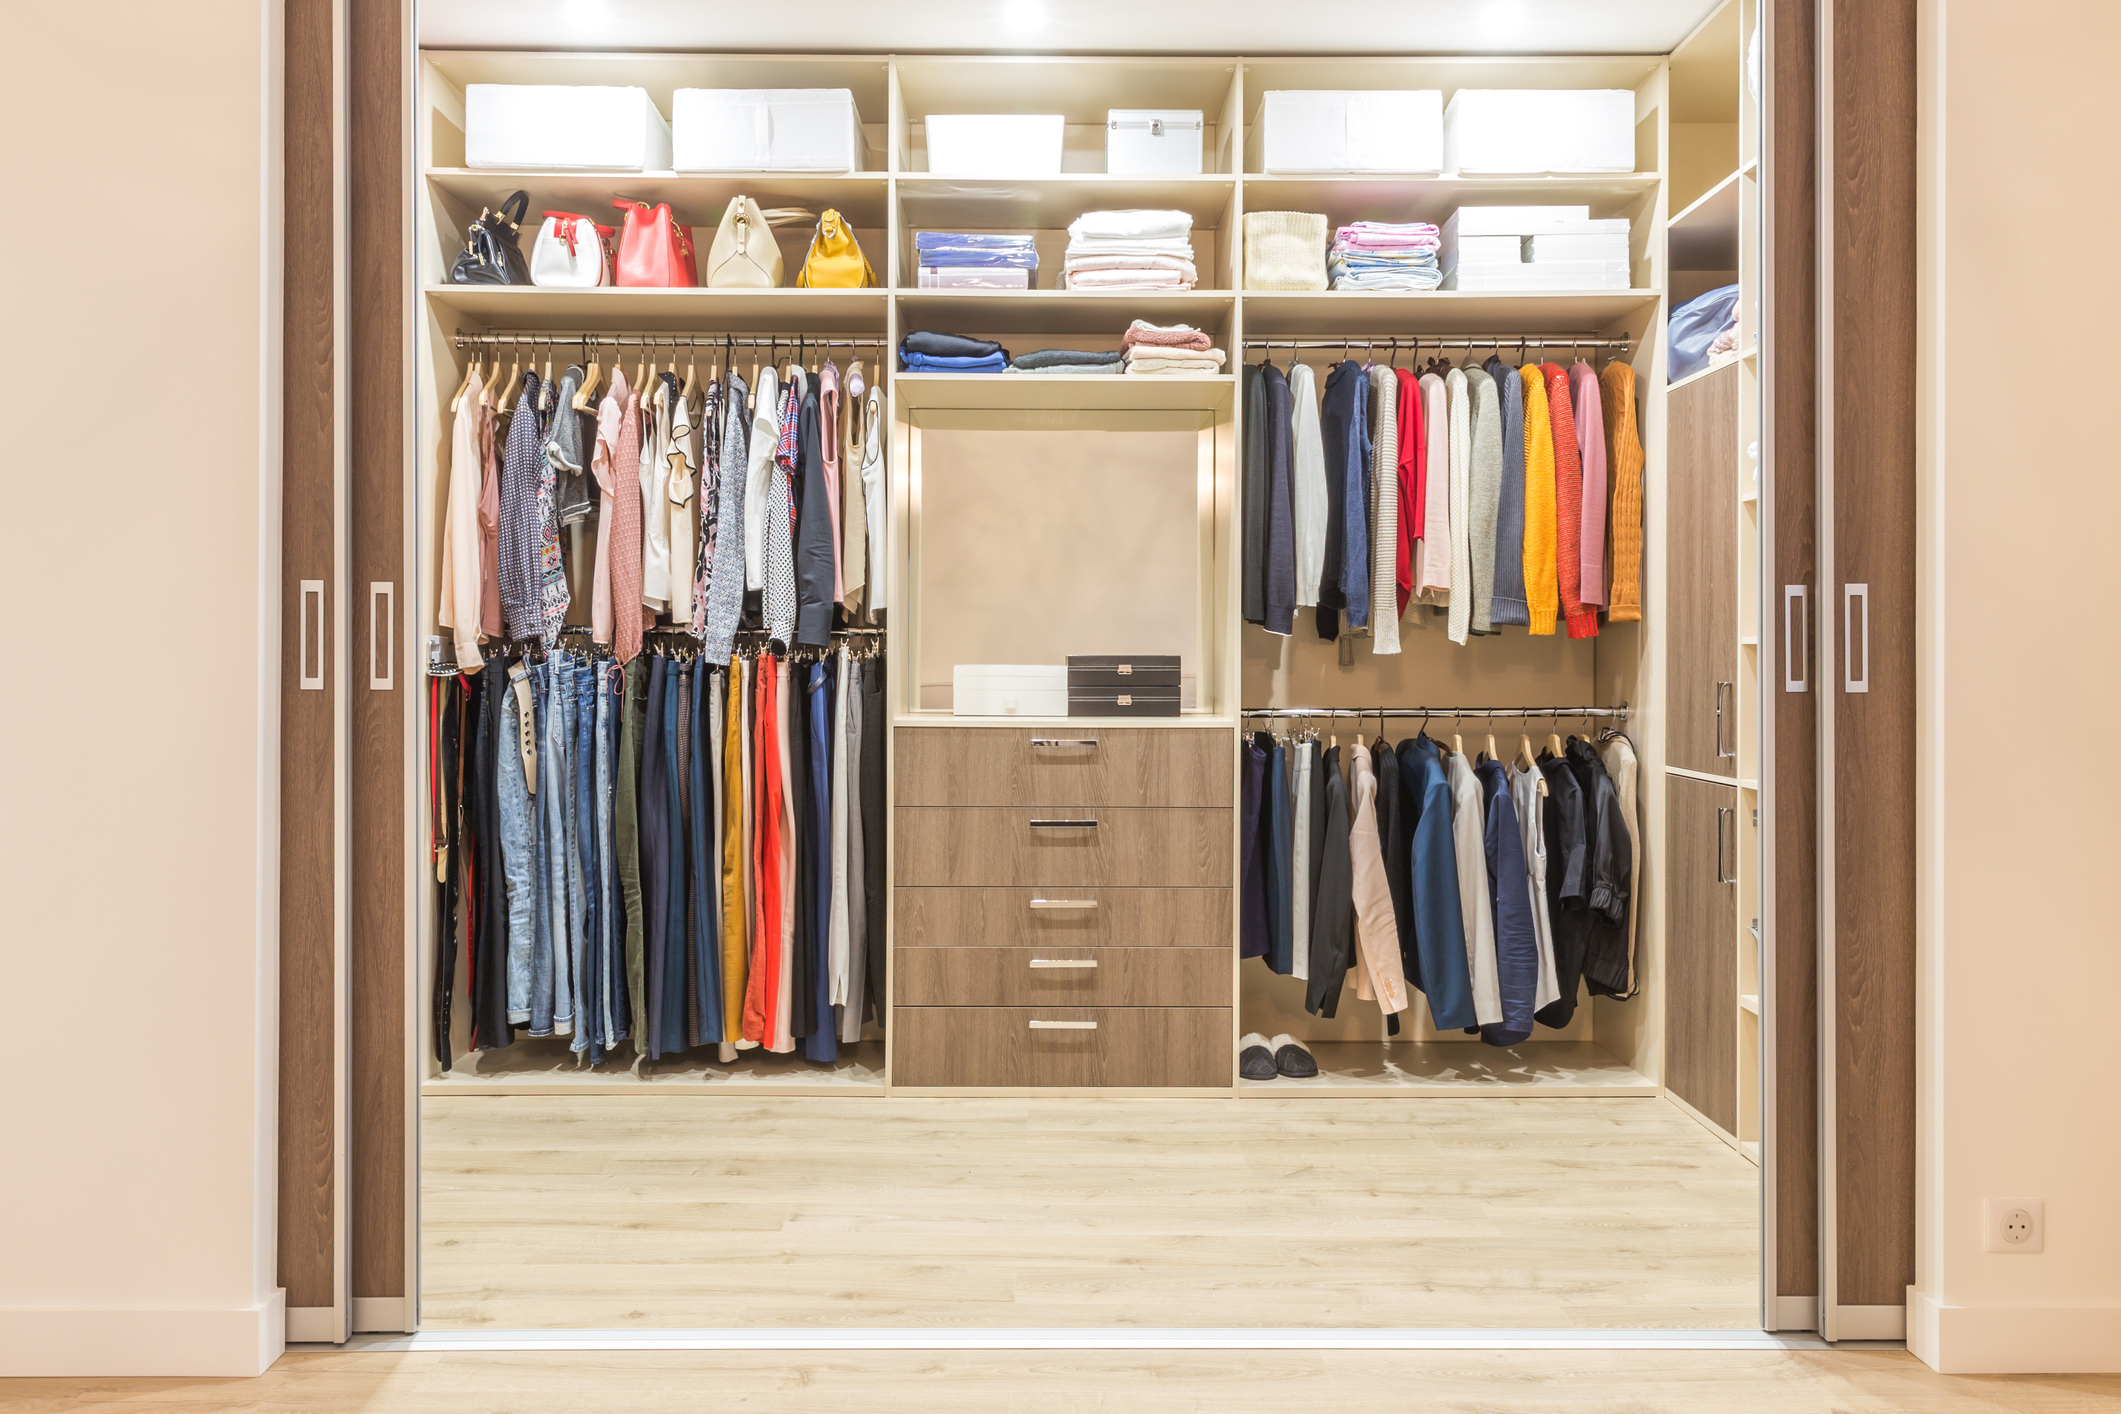 How To Clean Your Closet And Keep It Organized In 10 Steps